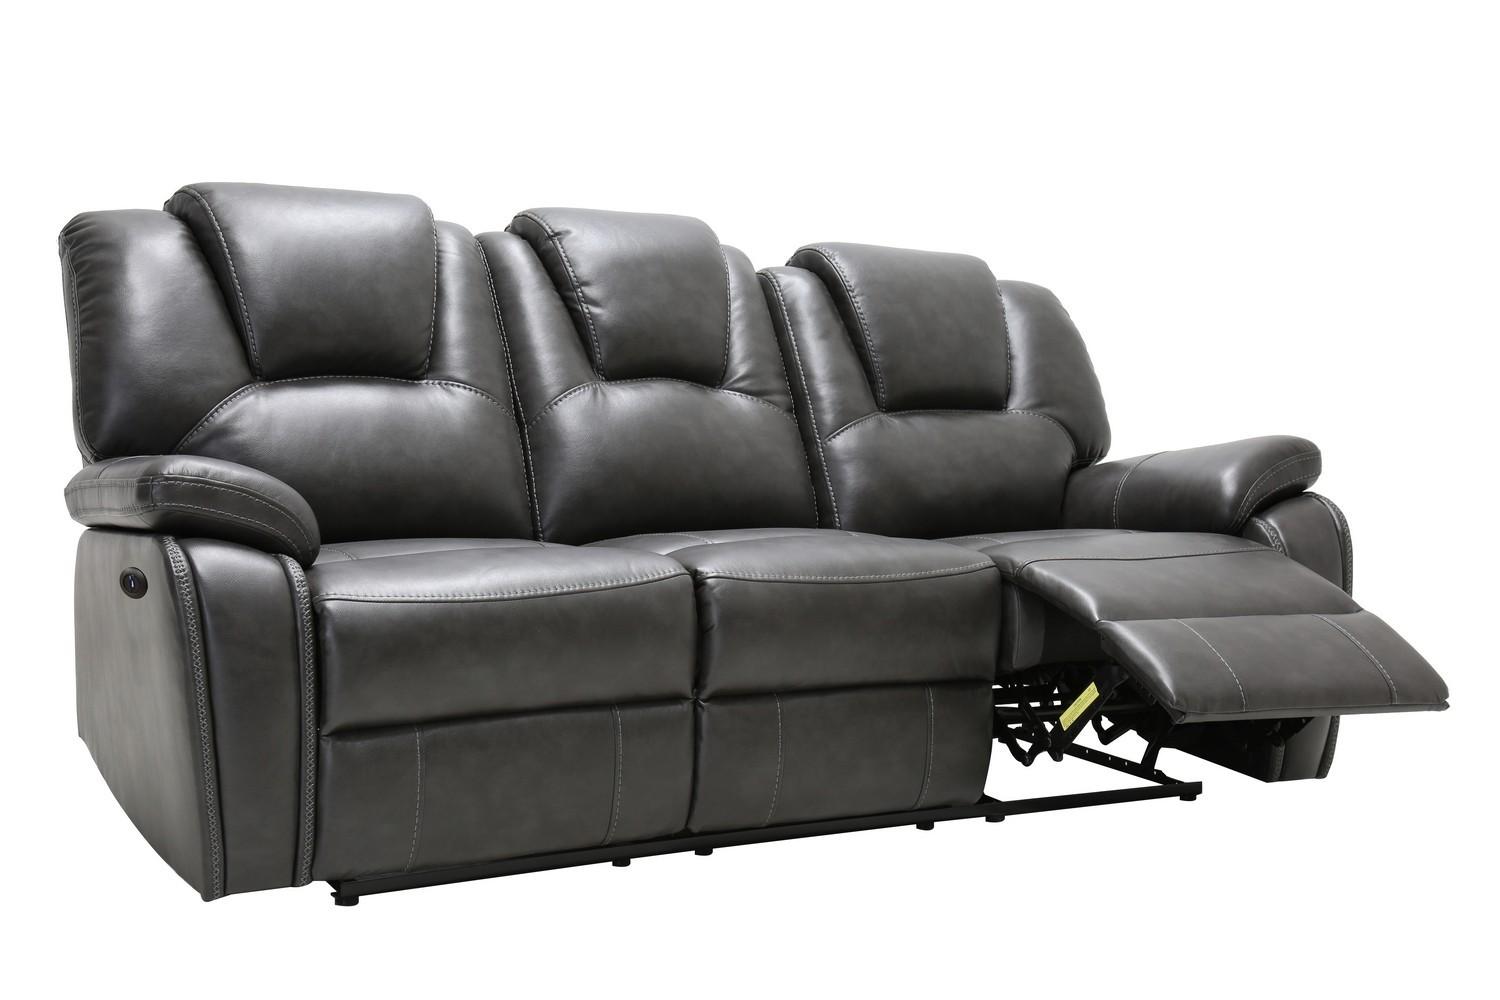 Contemporary Reclining Sofa 7993 7993-GRAY-PWR-S in Gray Leather Air Material